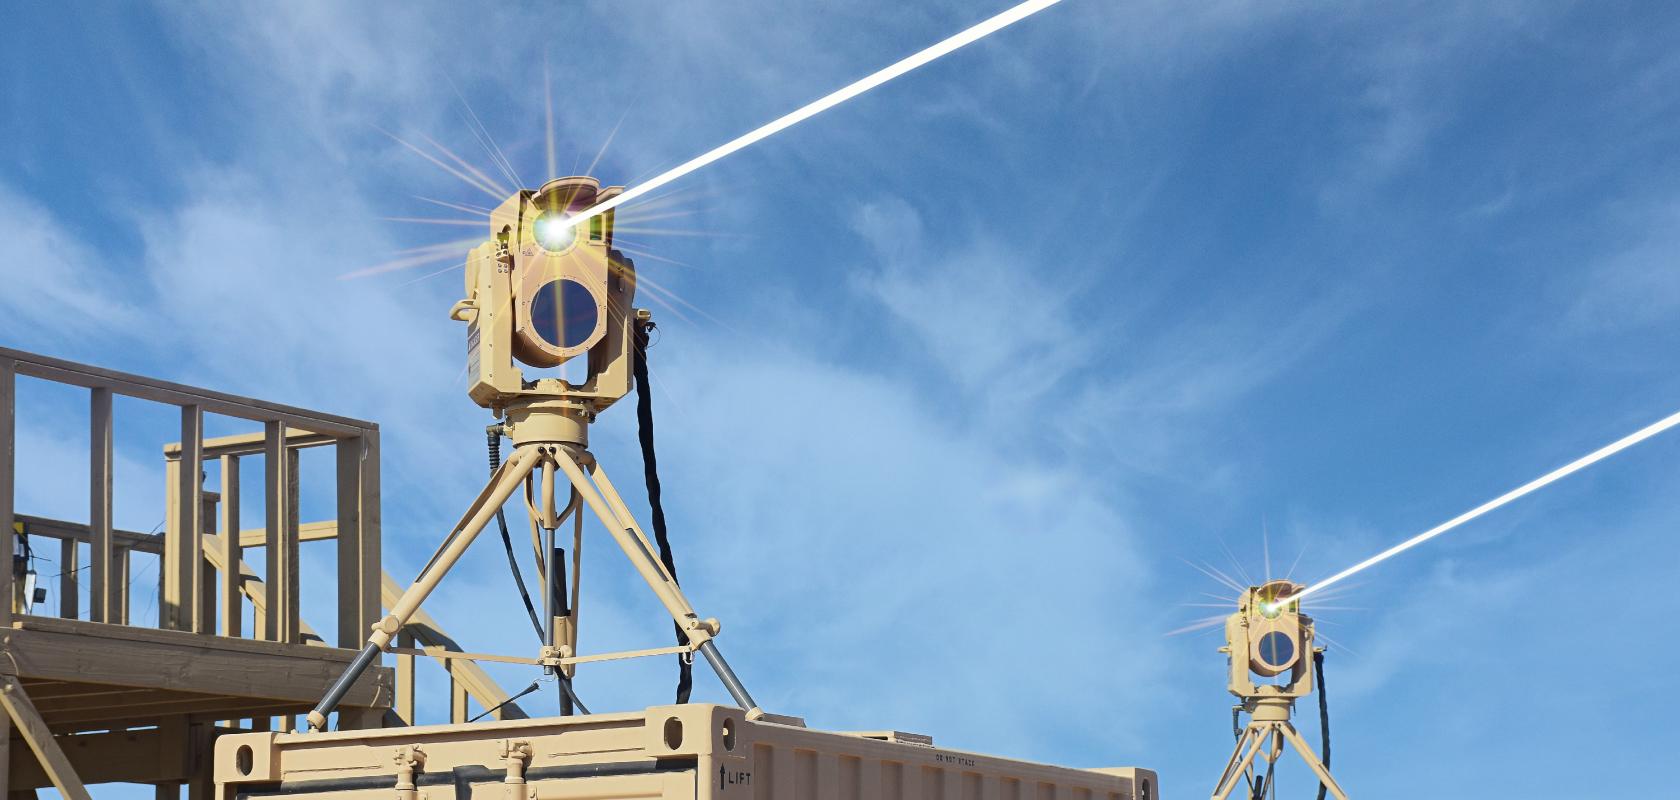 Boeing’s Compact Laser Weapon System